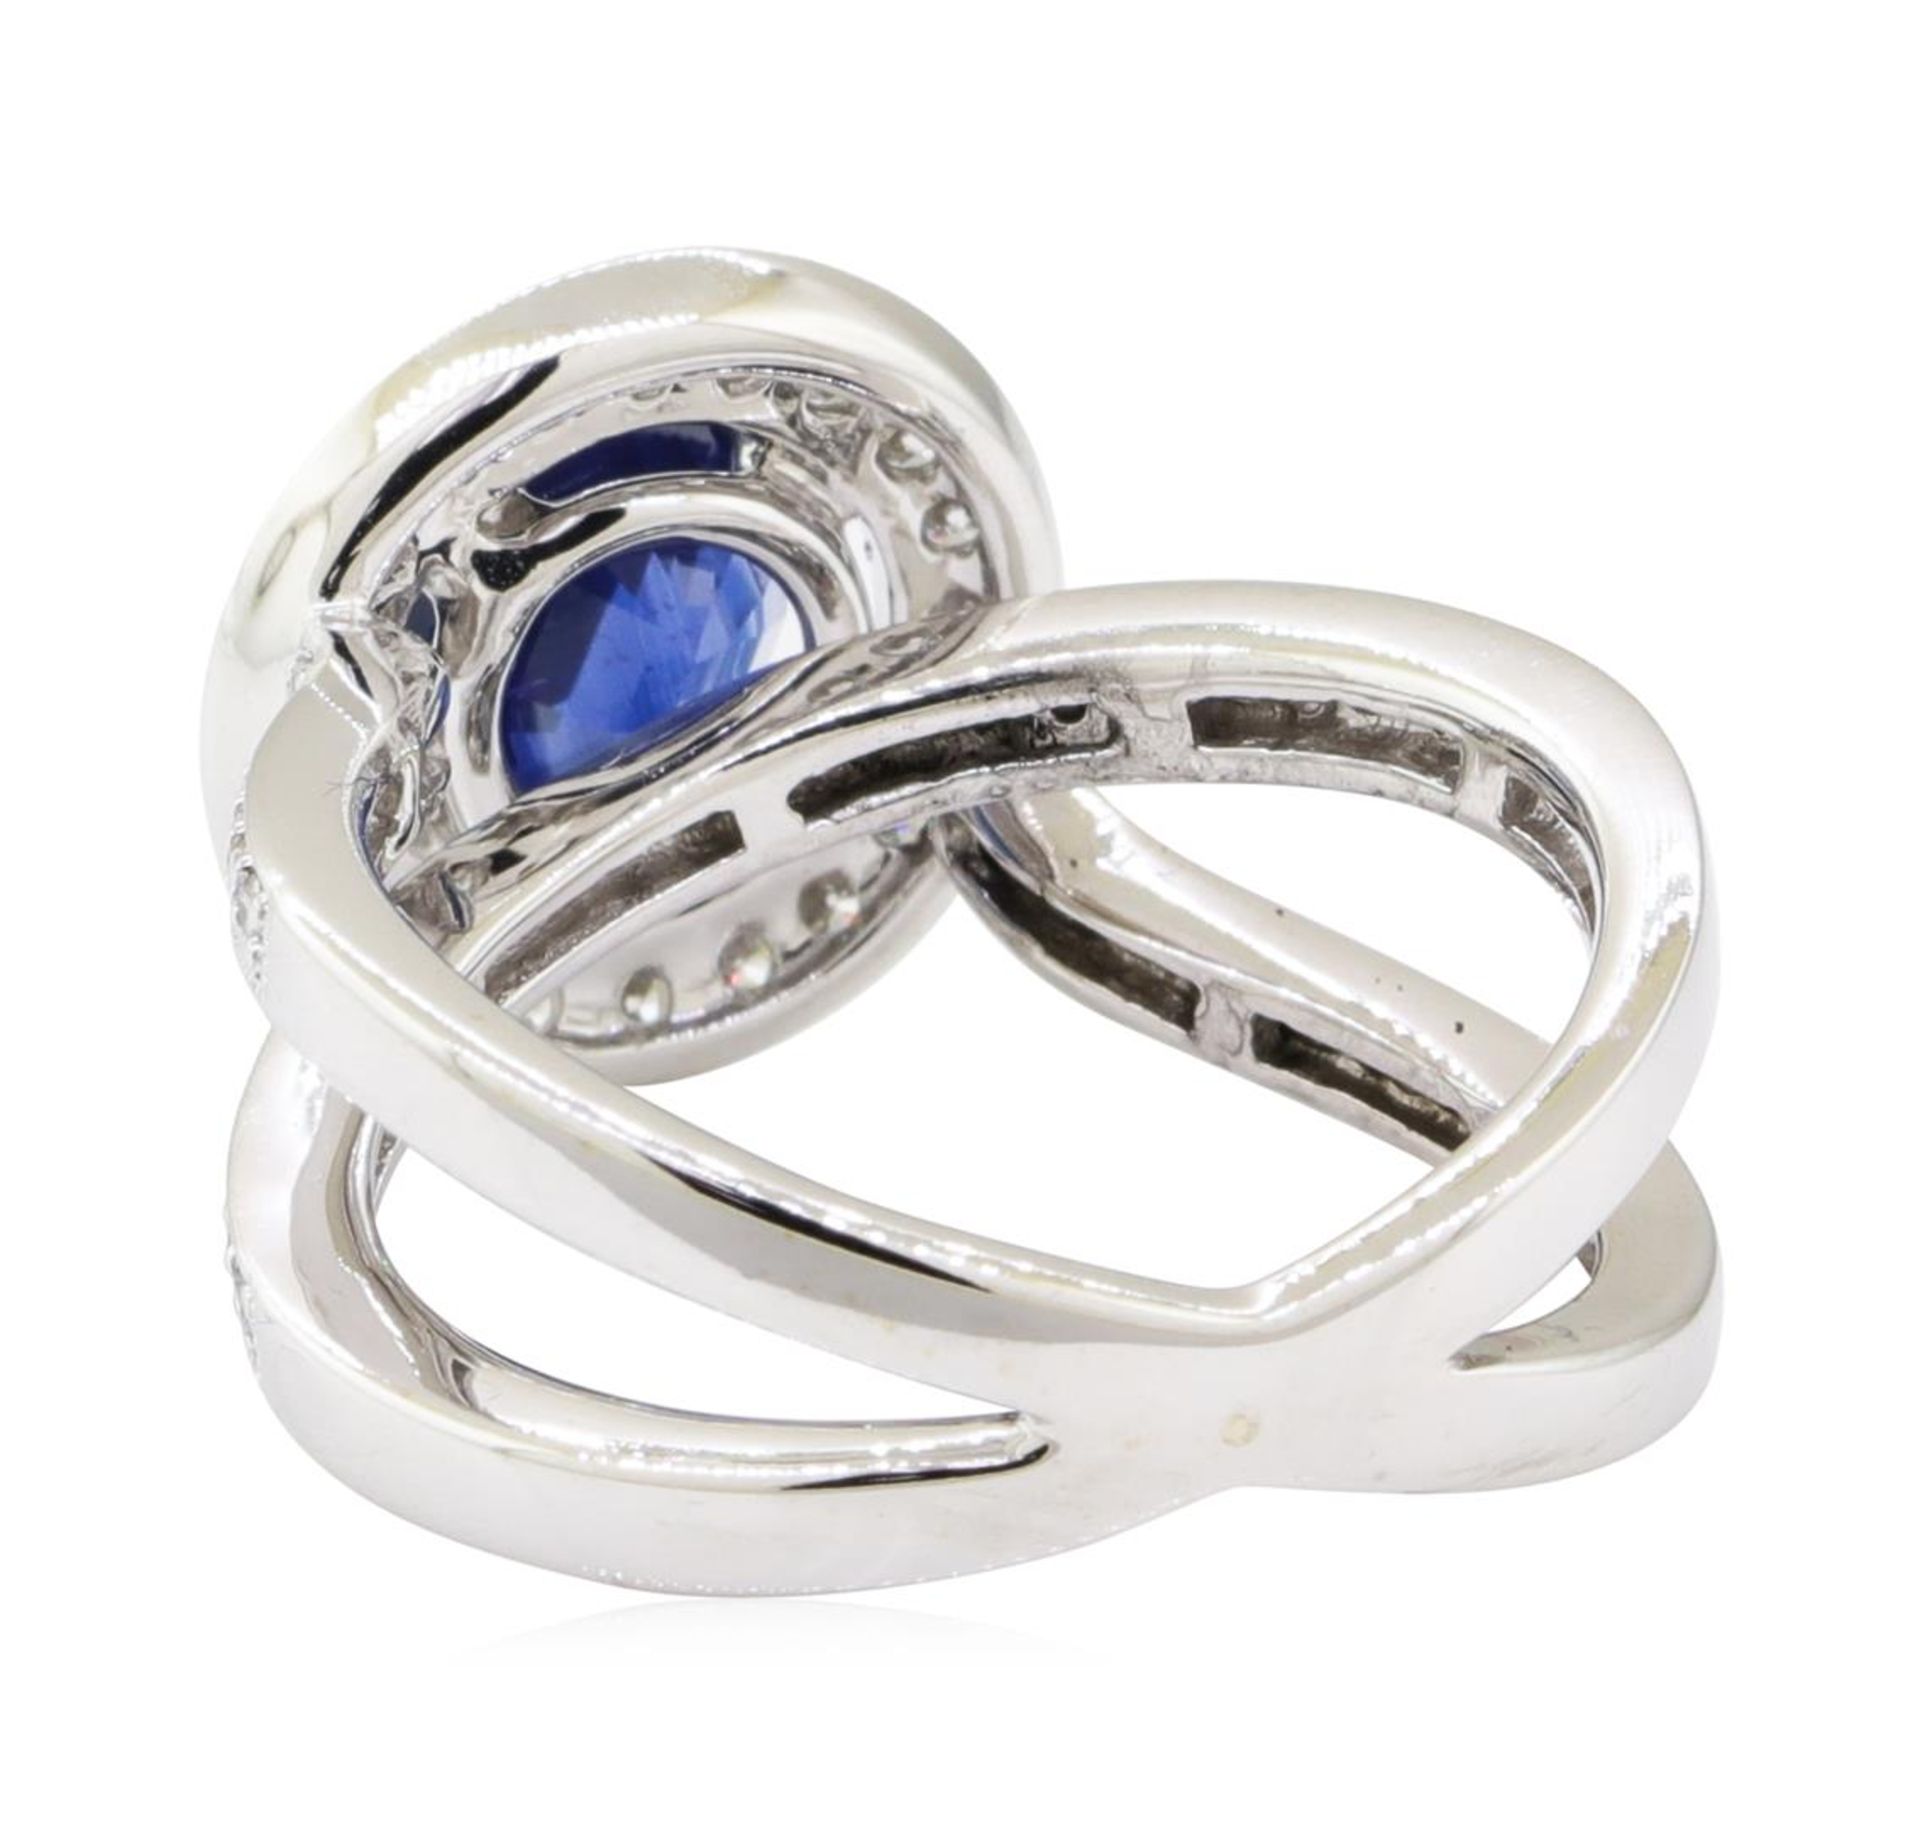 2.69 ctw Sapphire and Diamond Ring - 18KT White Gold - Image 3 of 5